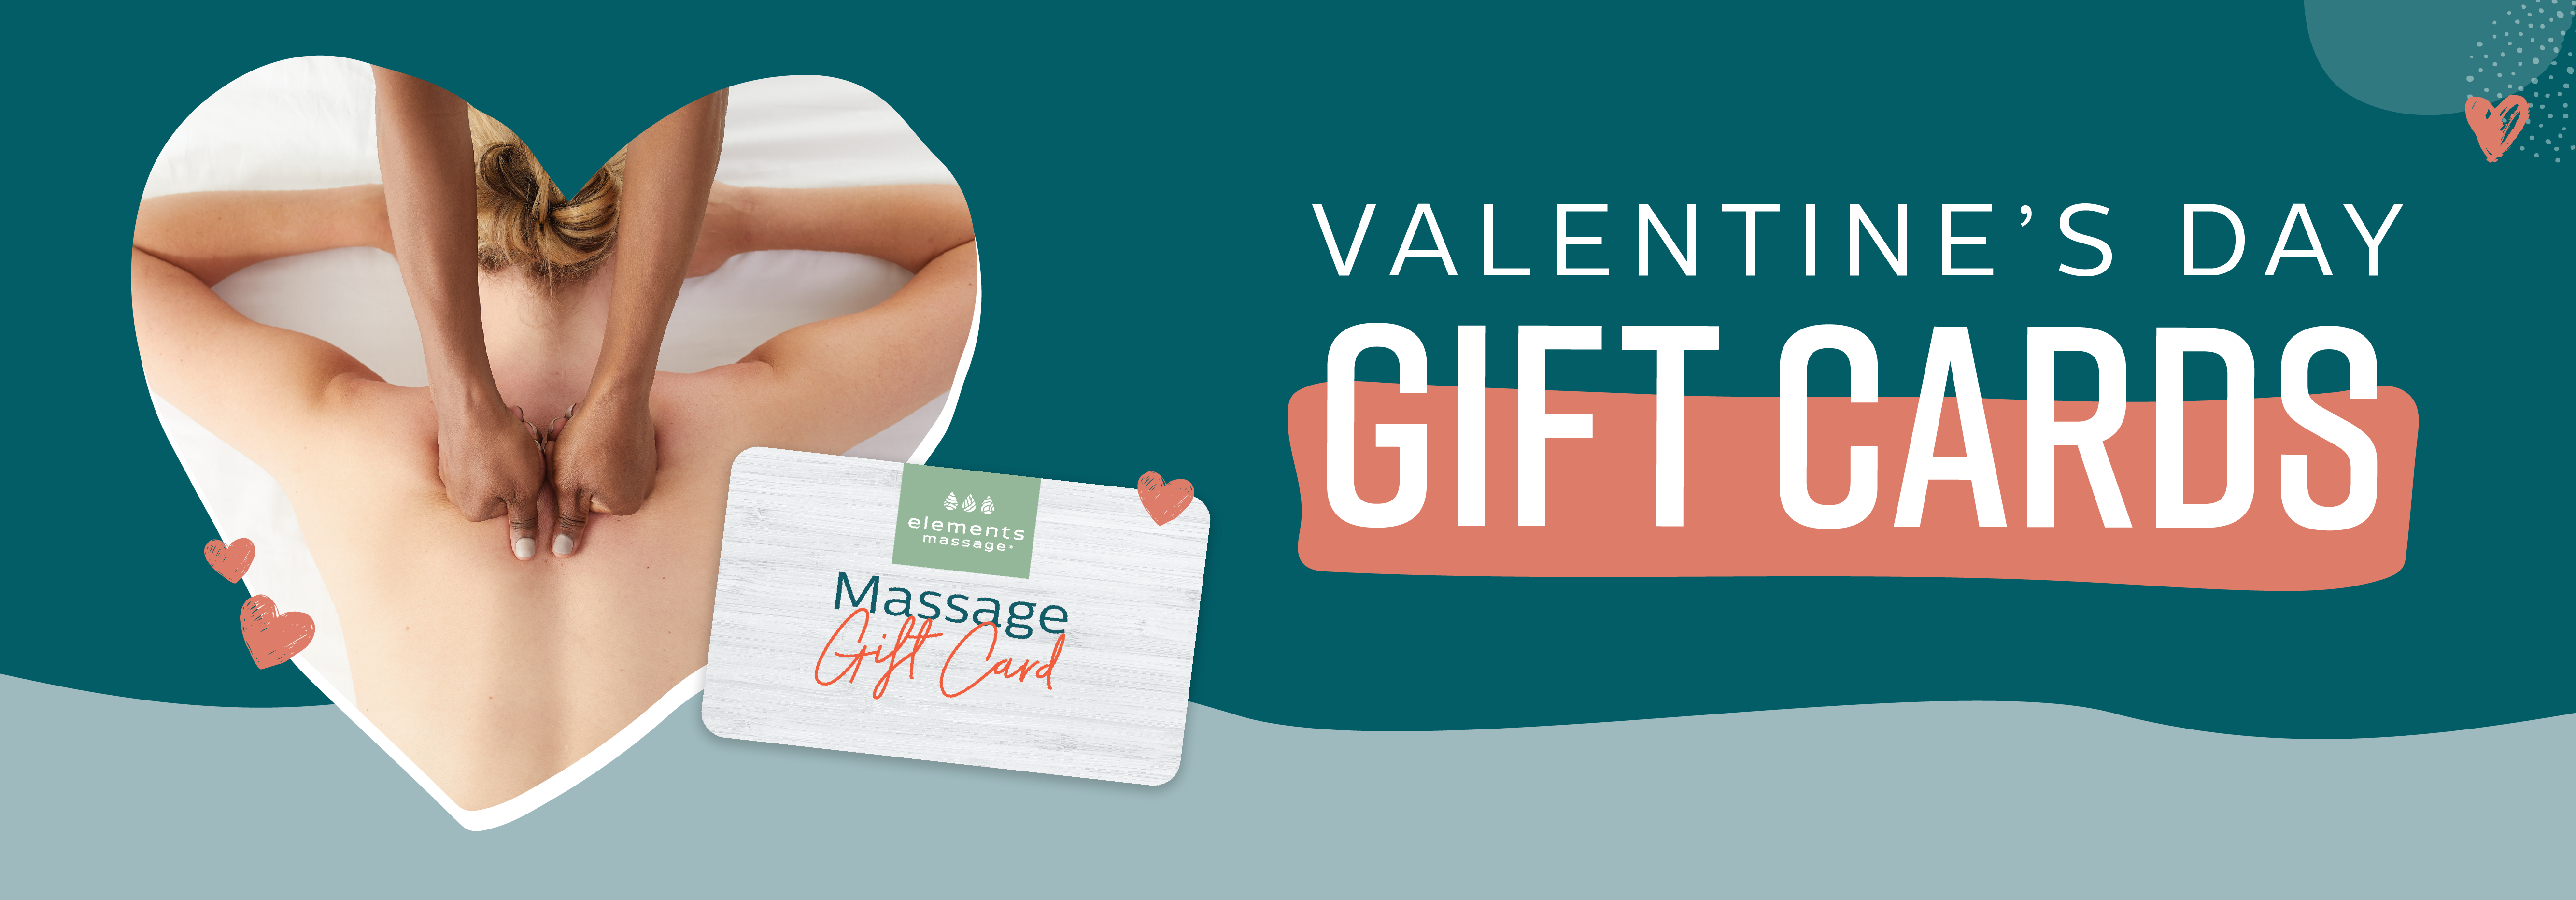 elements massage holiday gift cards